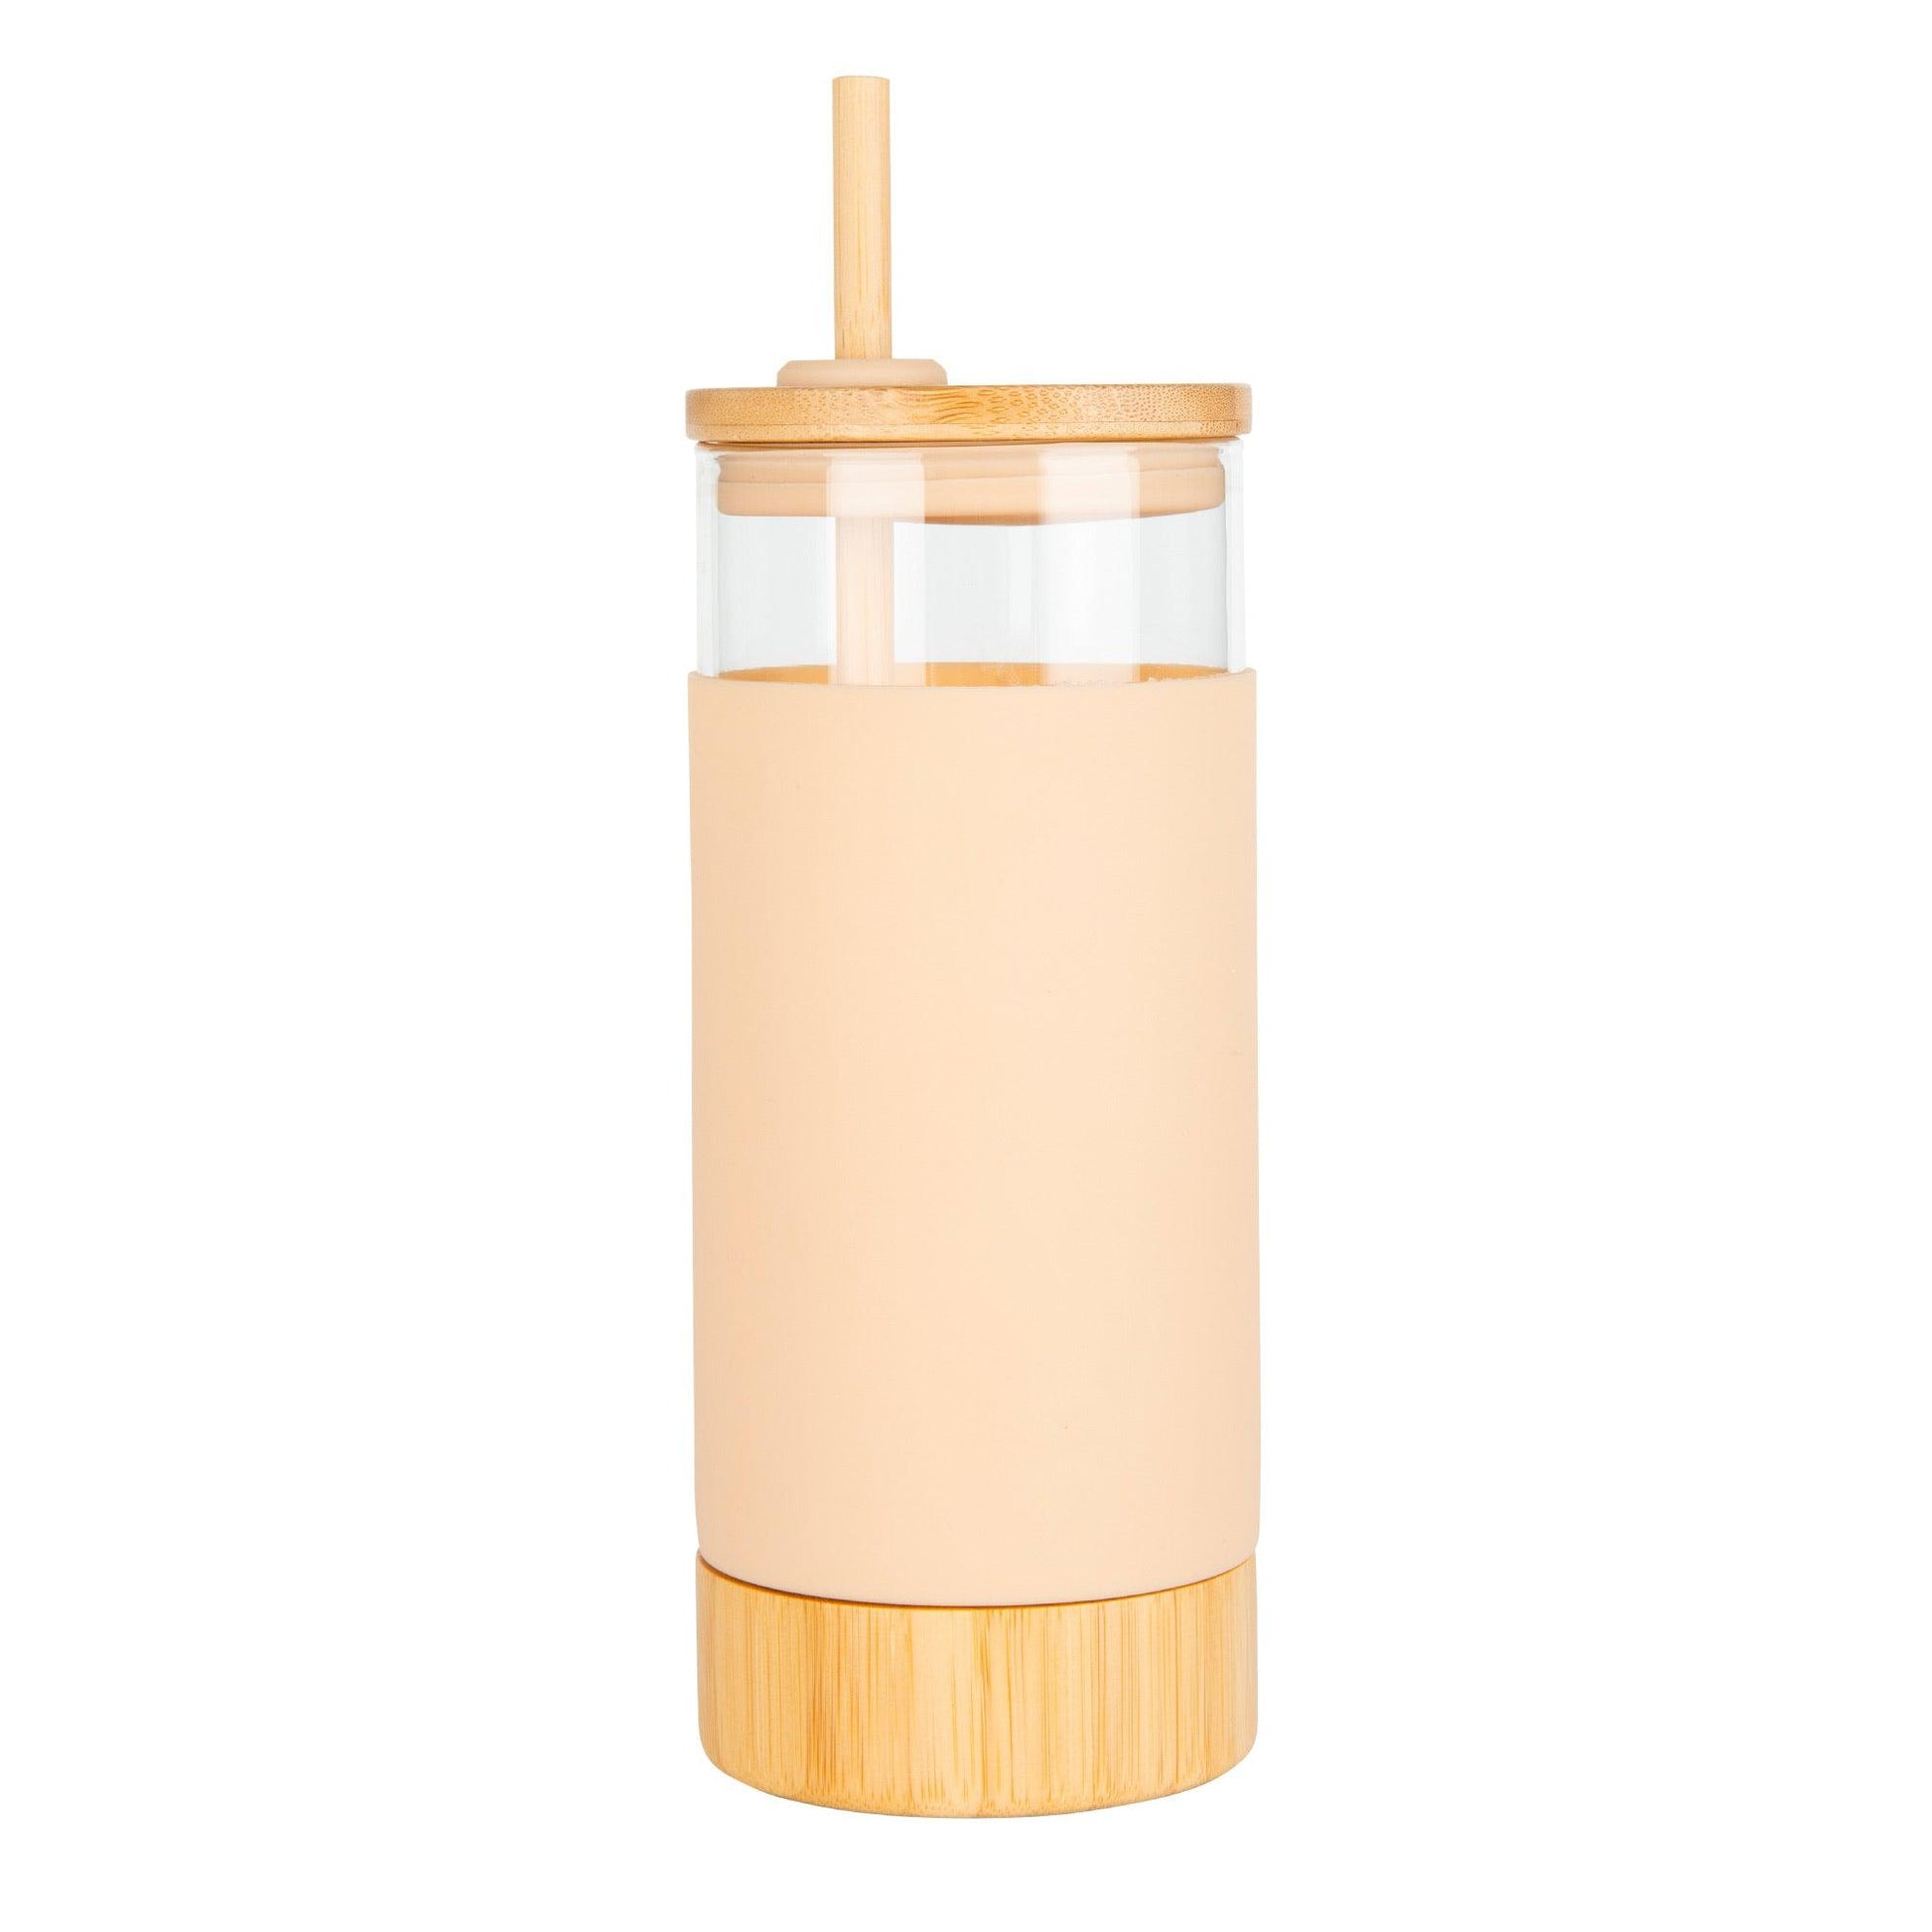 Bamboo Glass Silicone Drinking Cup with Straw - Little Label Co - Drinkware Sets - 30%, Bamboo Straw, Glass Travel Cup, Silicone Cup